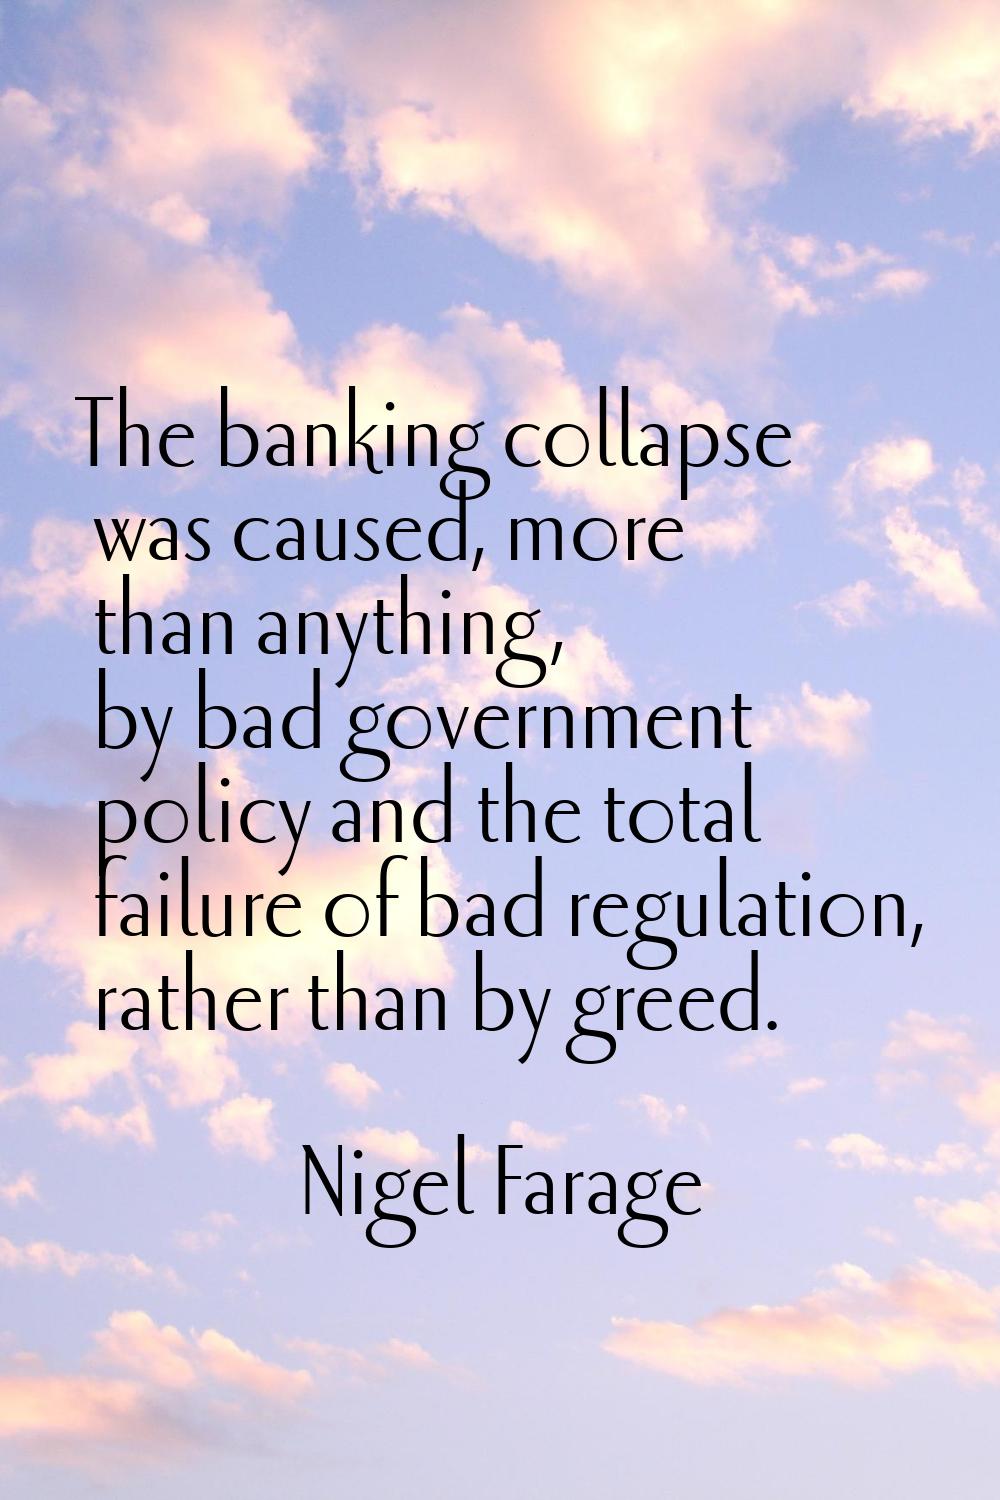 The banking collapse was caused, more than anything, by bad government policy and the total failure